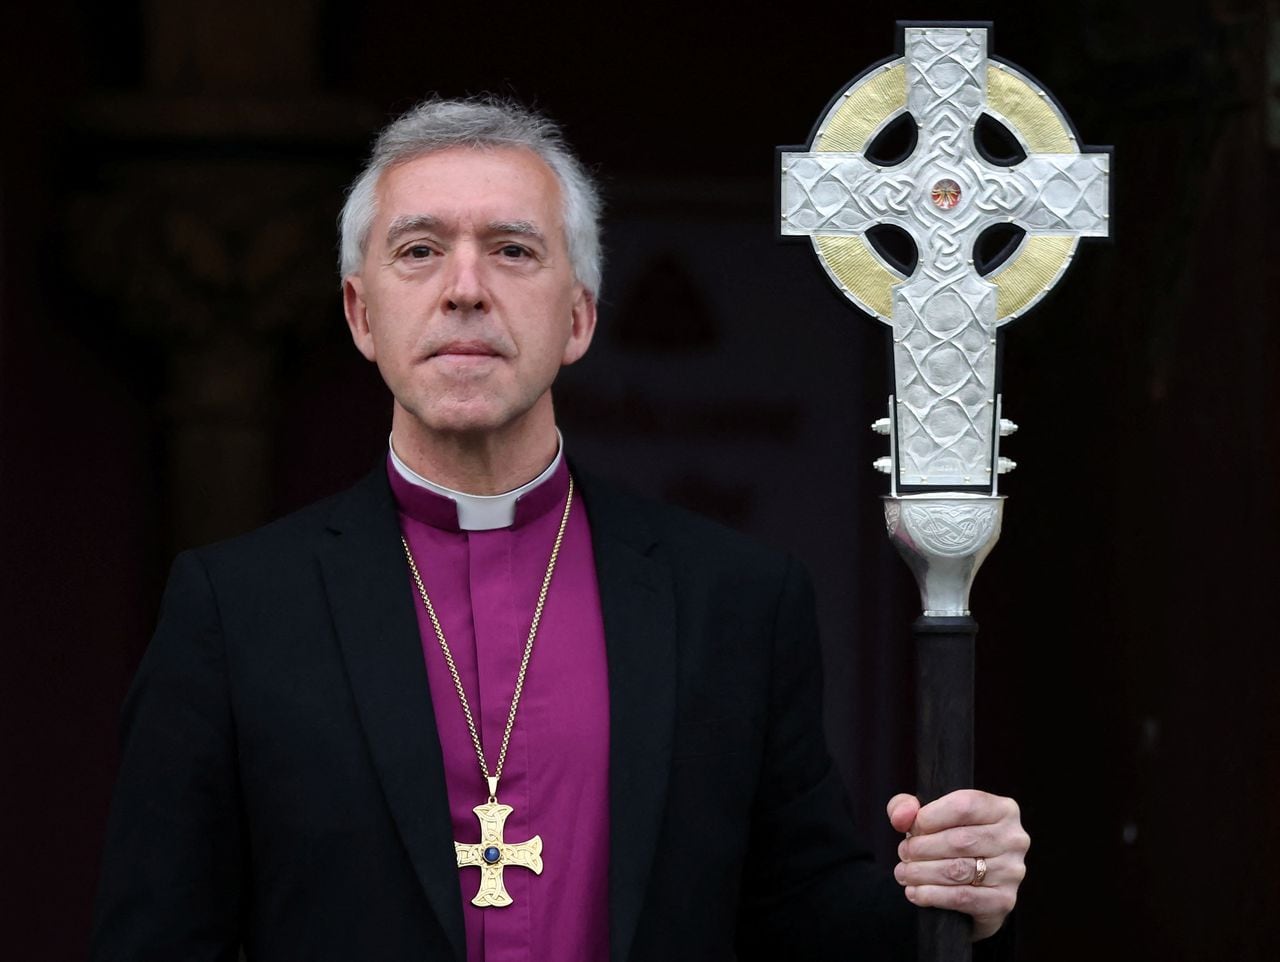 Archbishop of Wales Andrew John poses with the new Cross of Wales, which will be used in the procession during the Coronation of Britain’s King Charles, before a service at Holy Trinity Church in Llandudno, Britain April 19, 2023. REUTERS/Phil Noble